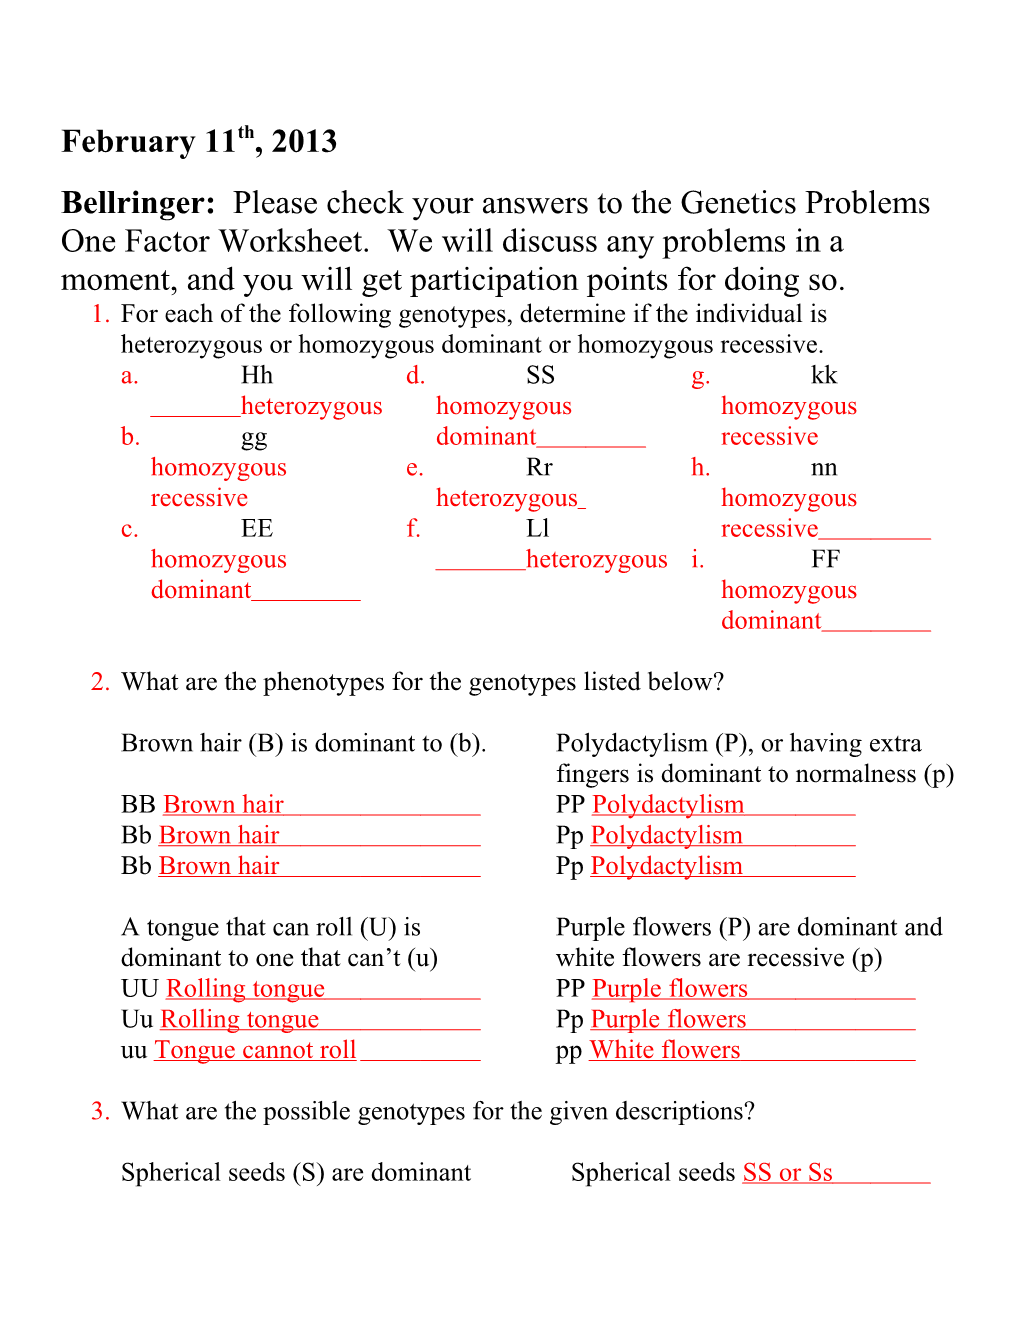 Bellringer: Please Check Your Answers to the Genetics Problems One Factor Worksheet. We